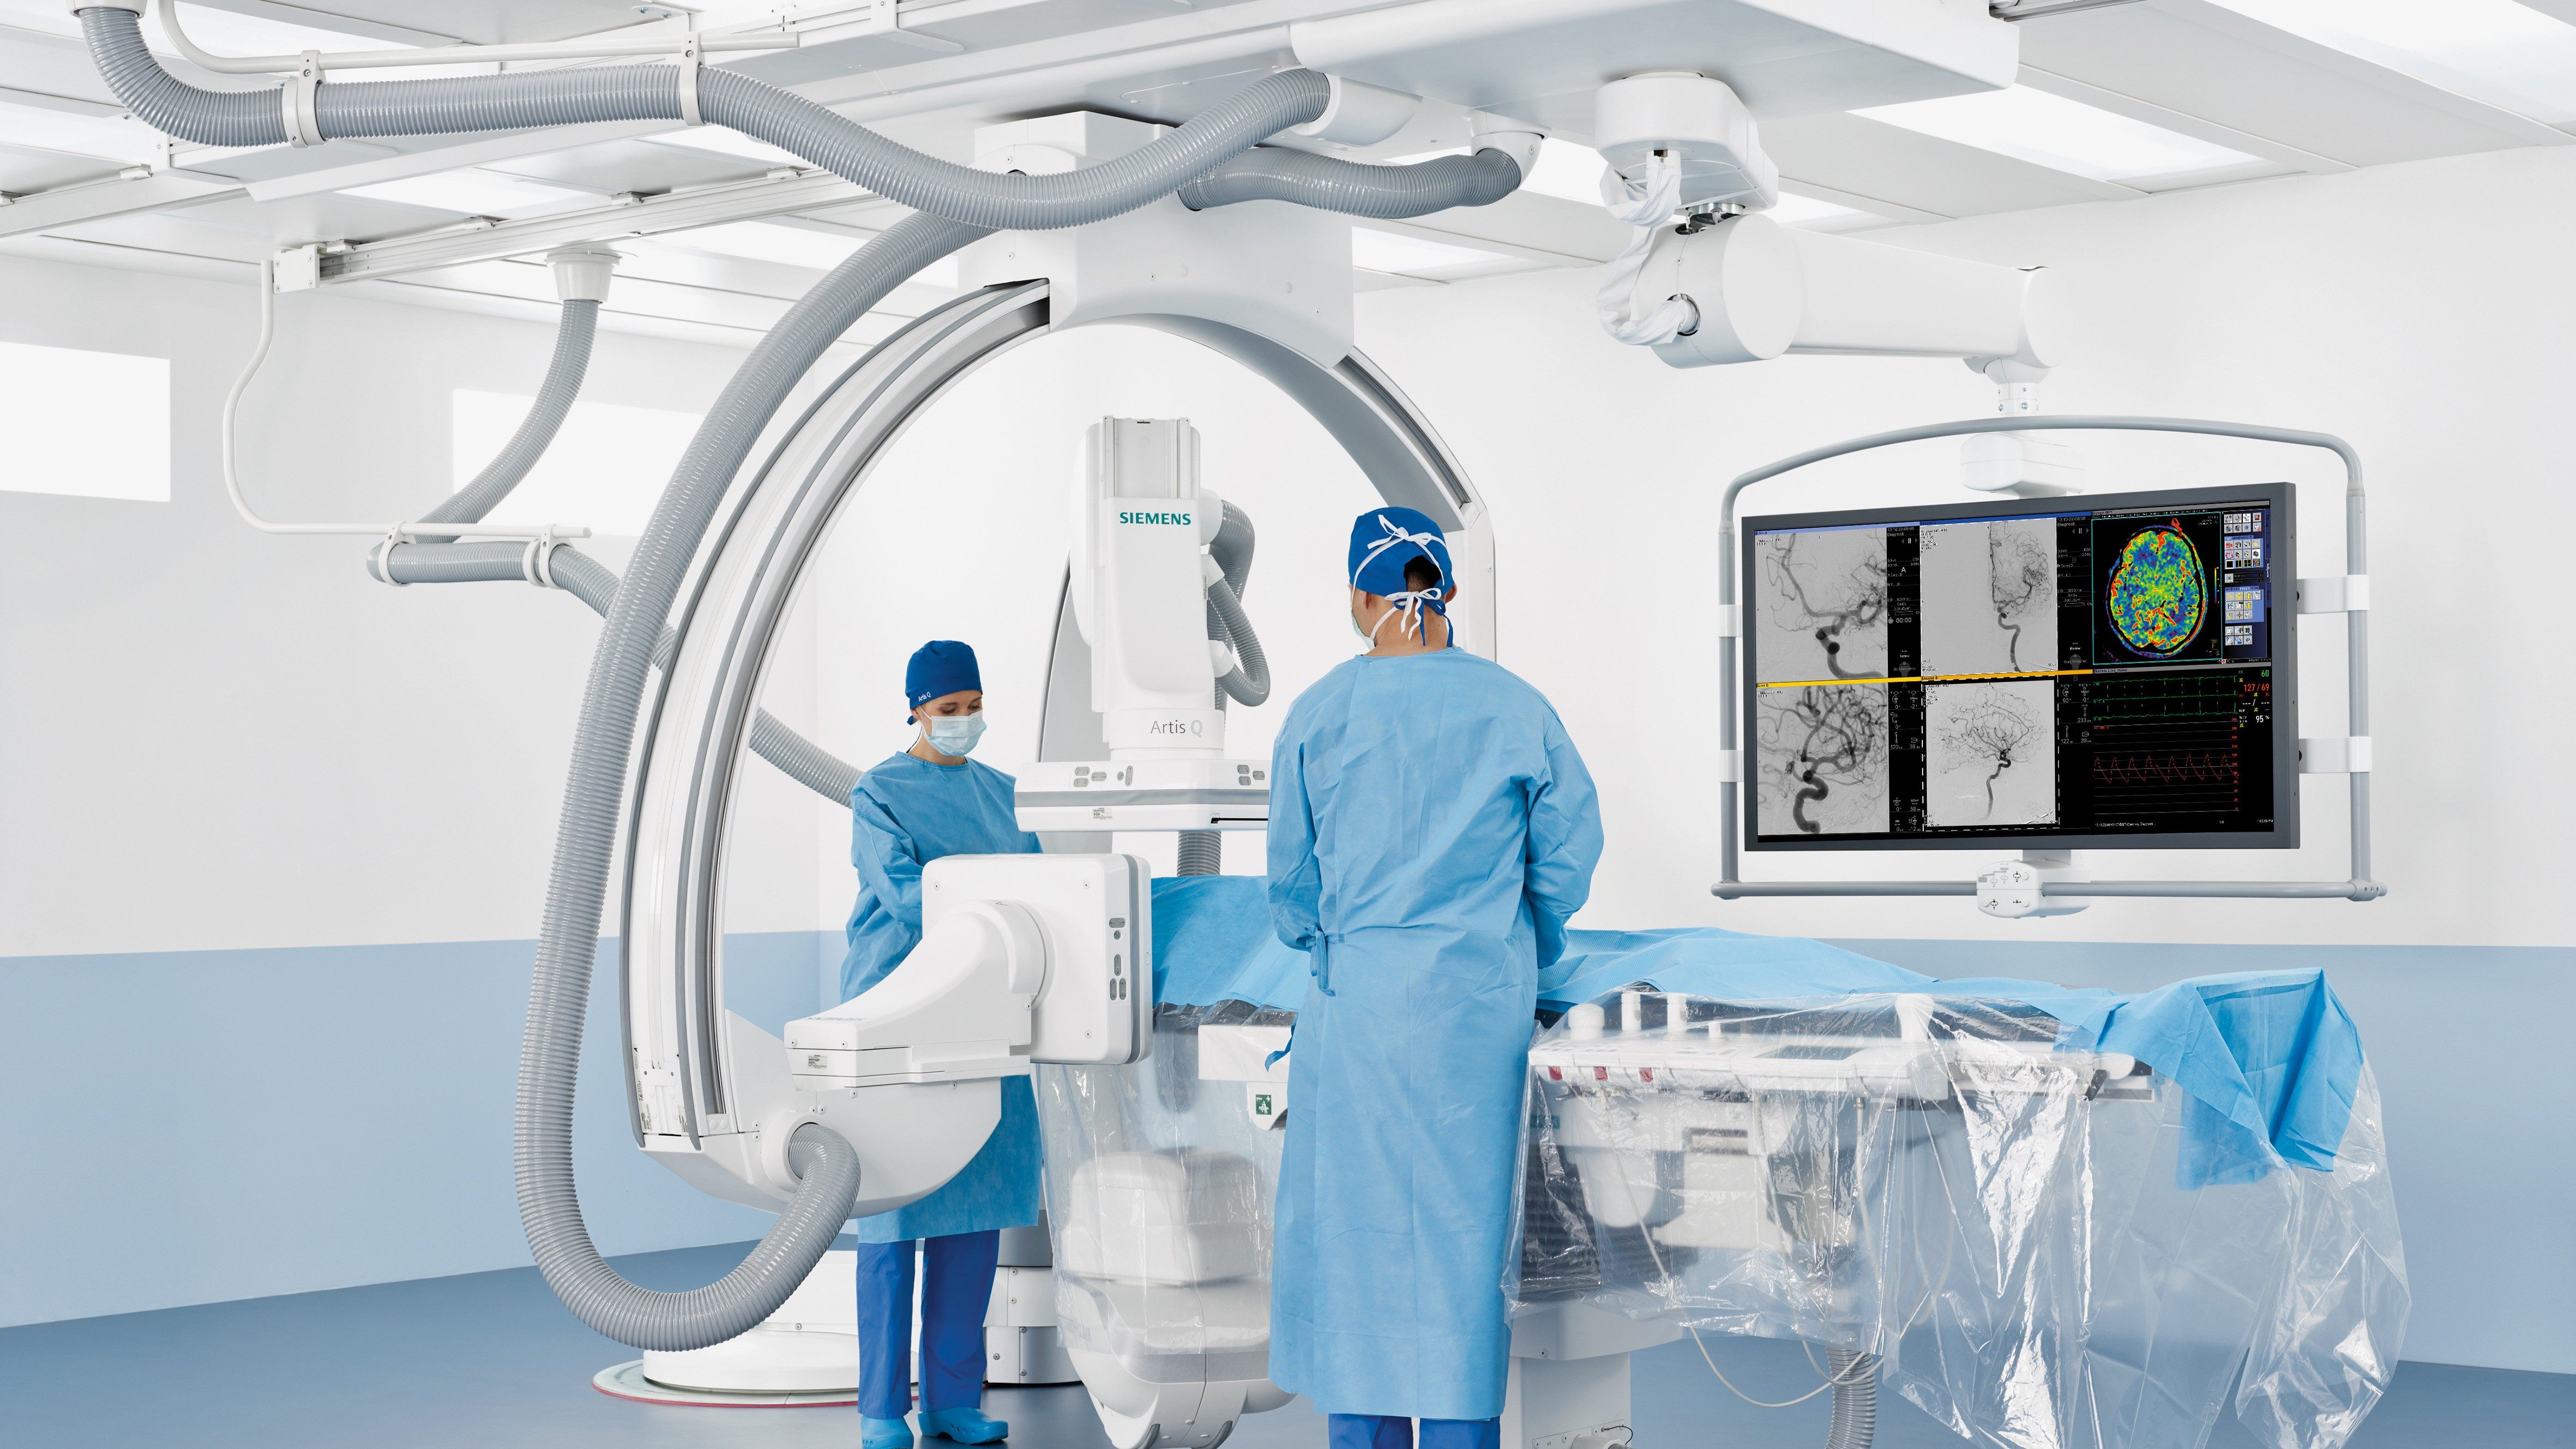 syngo solutions support thrombectomy interventions